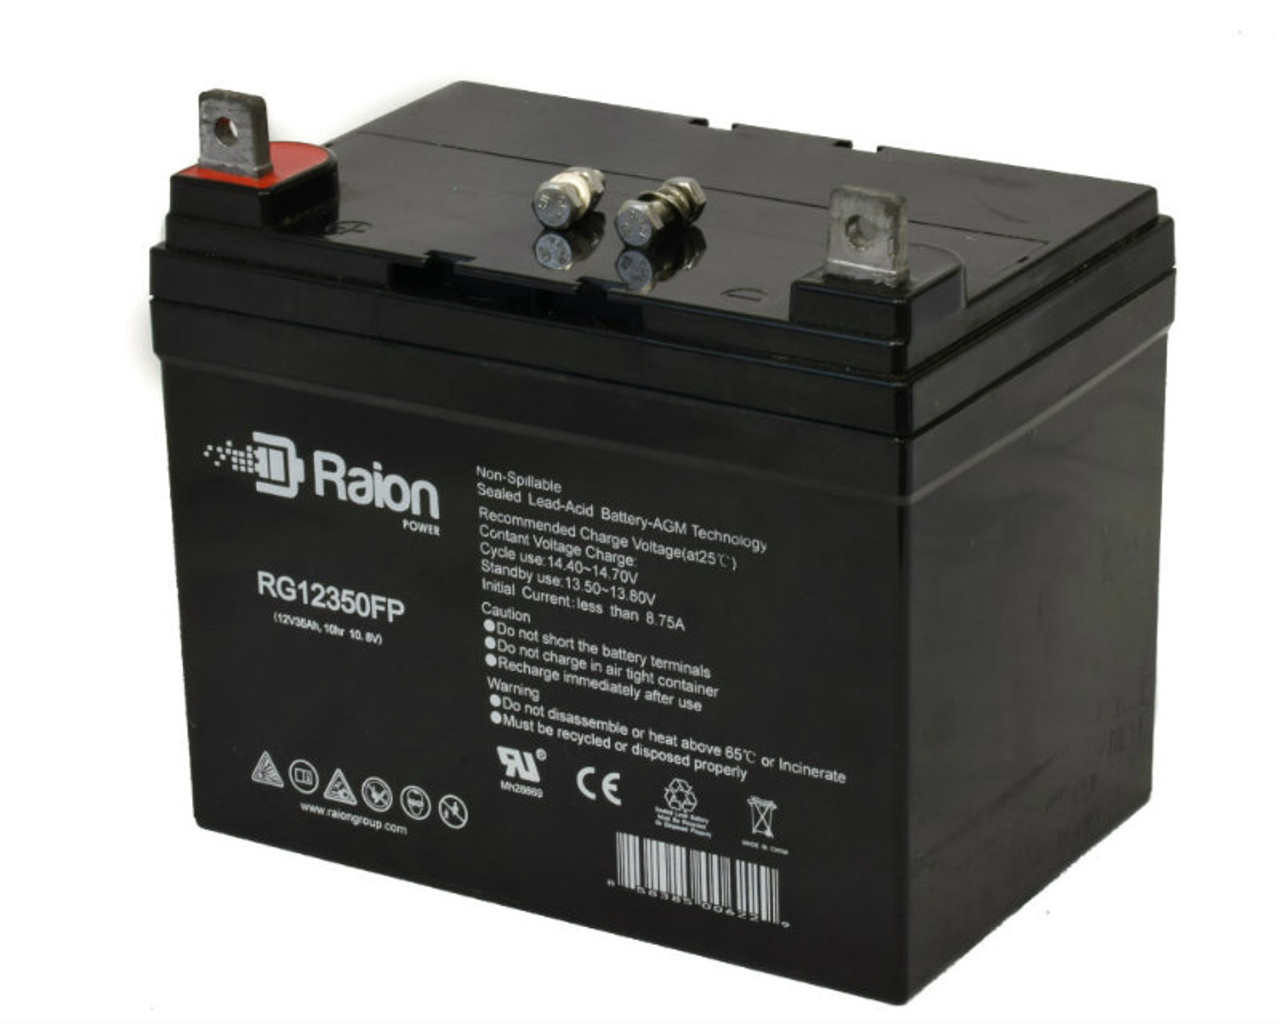 Raion Power Replacement 12V 35Ah Emergency Light Battery for Exit Light Company EL-BEB - 1 Pack